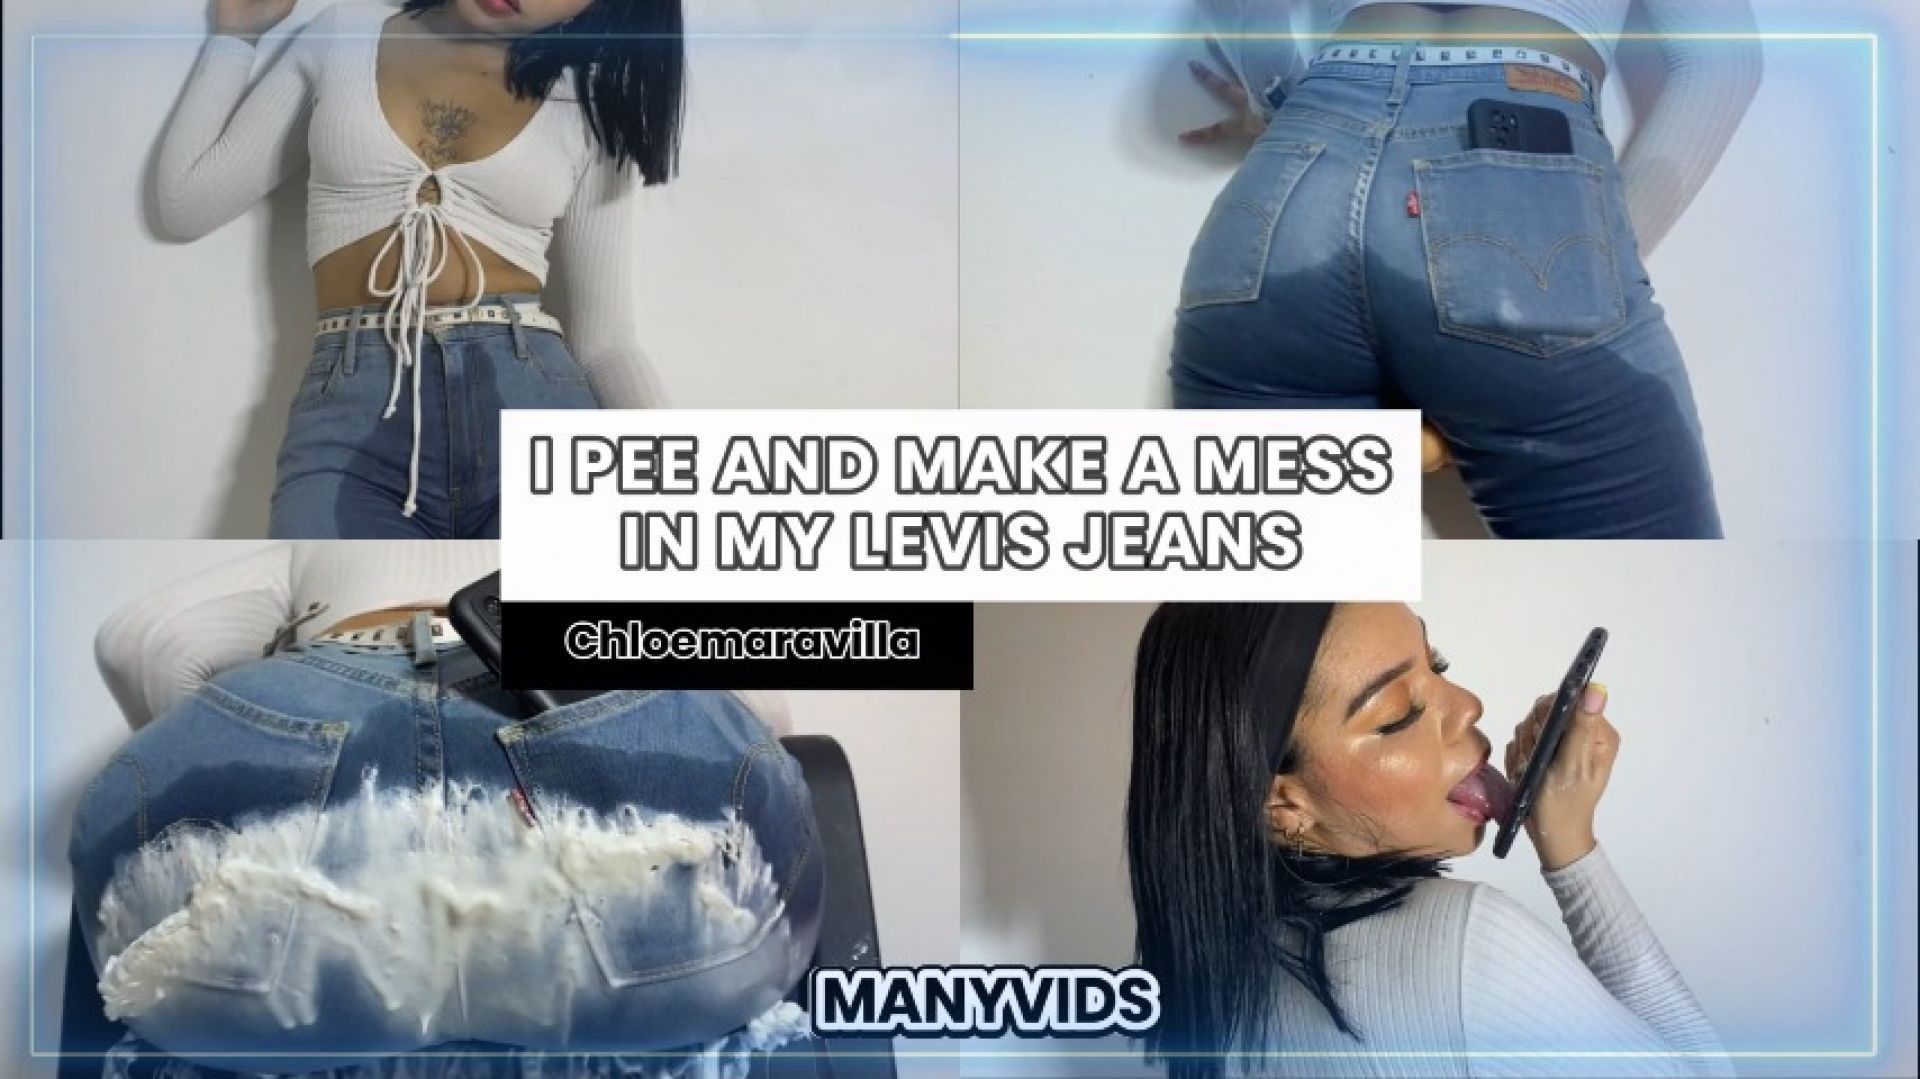 I PEE AND MAKE A MESS IN MY LEVIS JEANS